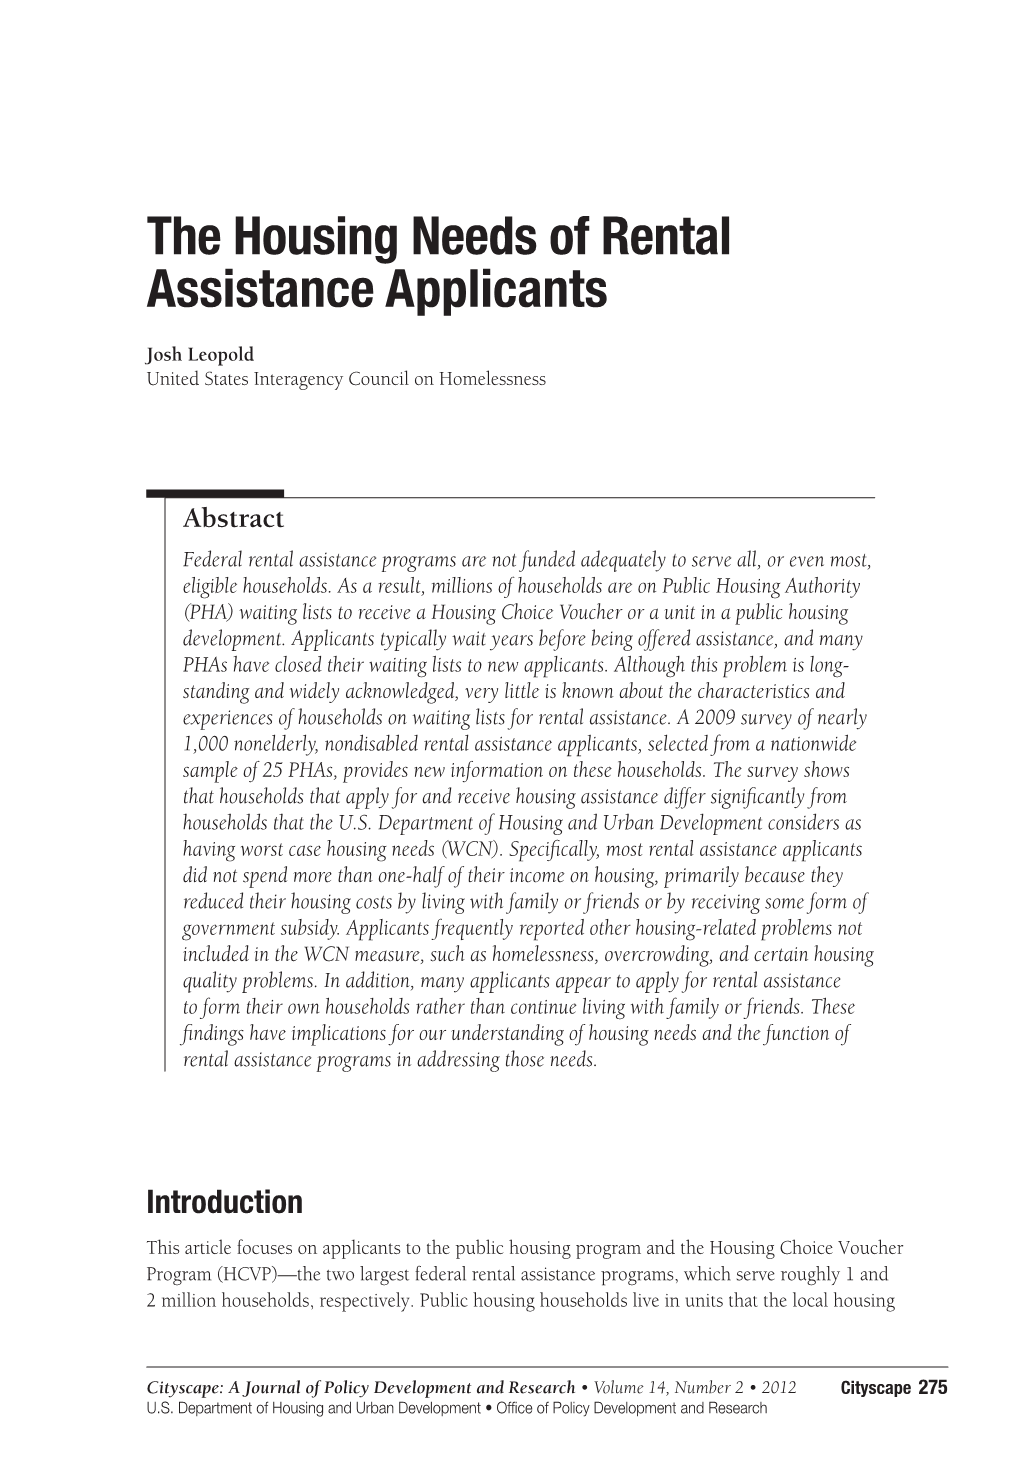 The Housing Needs of Rental Assistance Applicants